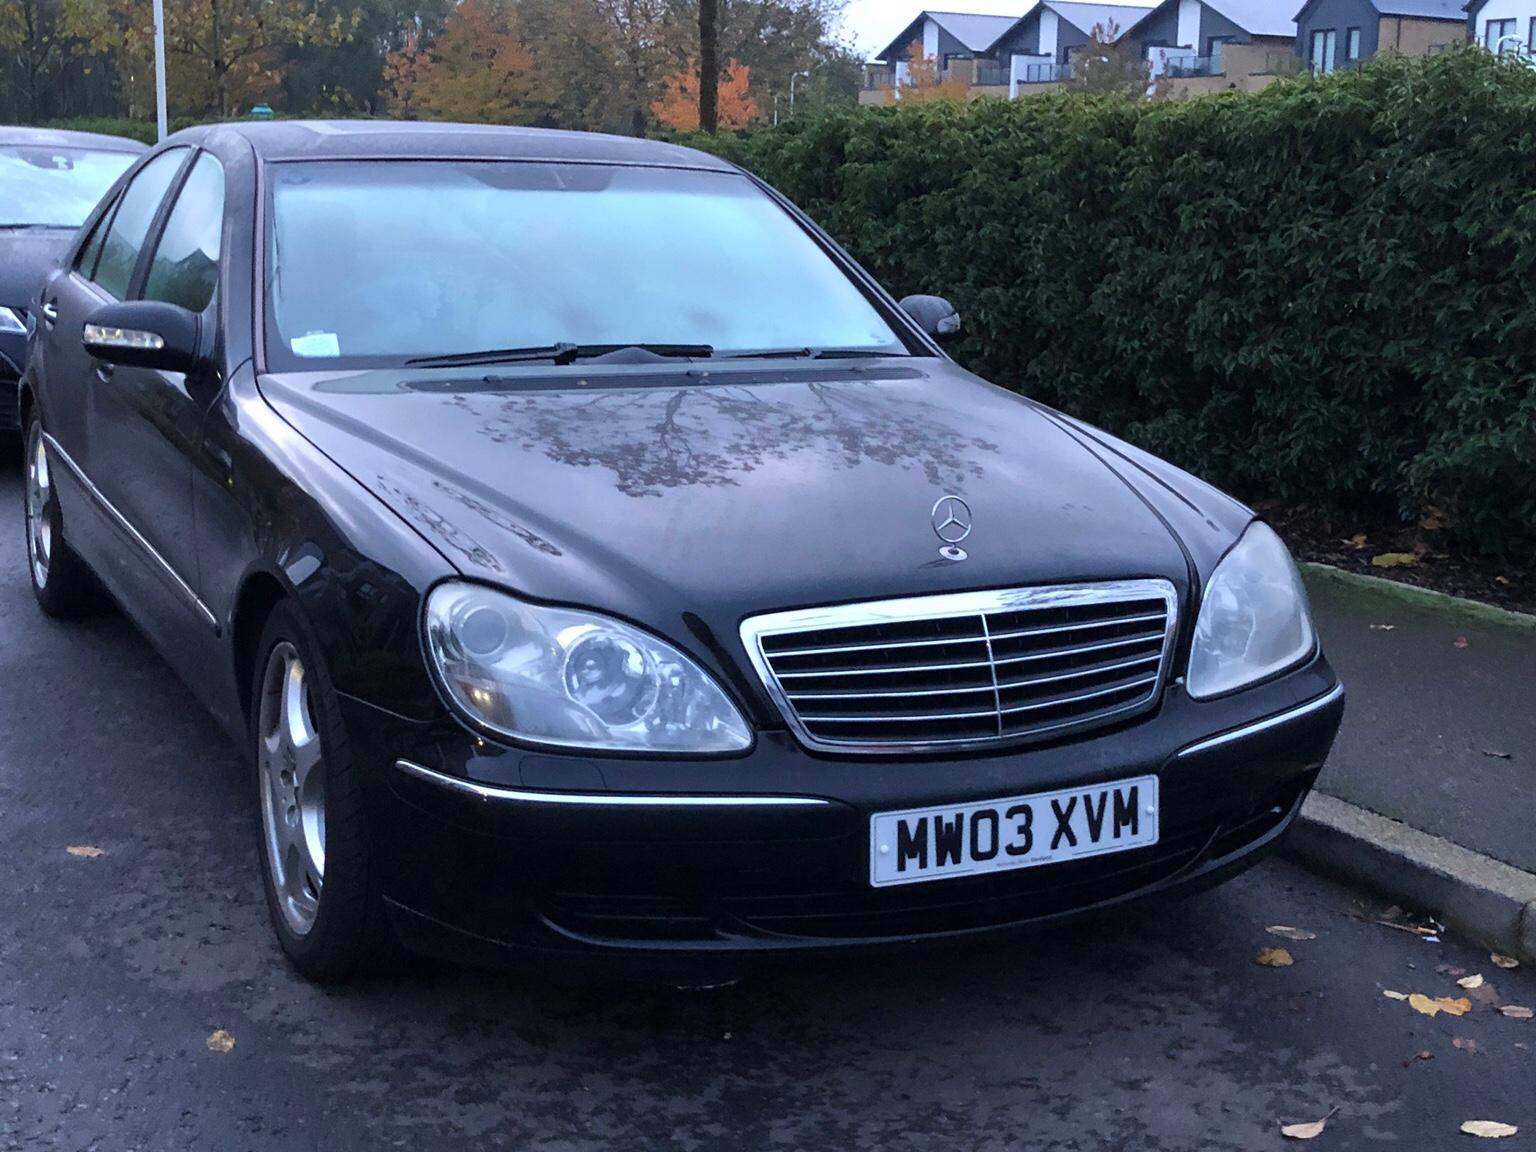 Mercedes S320 cdi in SW6 Fulham for £1,790.00 for sale